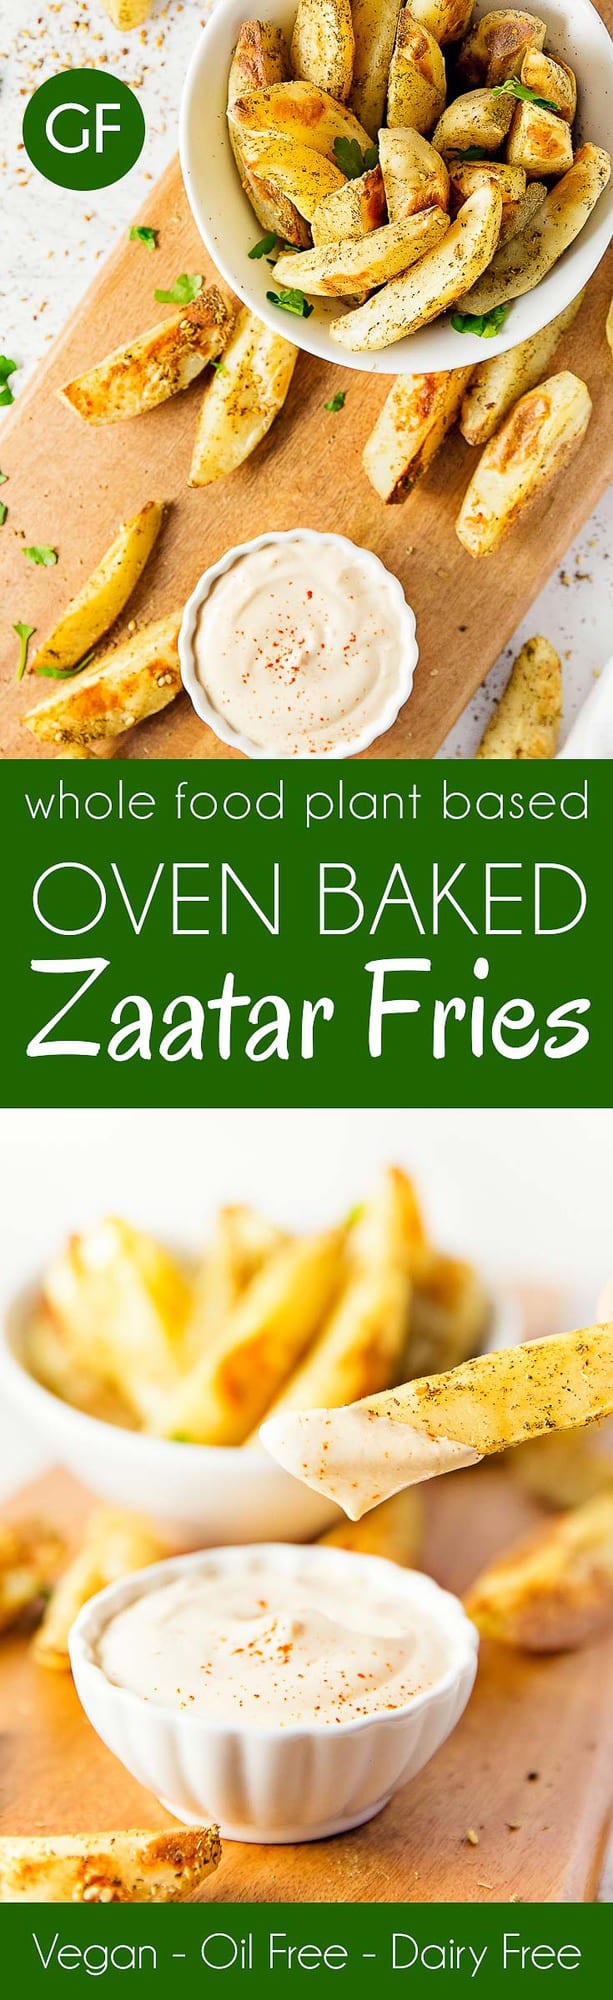 Oven Baked Zaatar Fries, plant based, vegan, vegetarian, whole food plant based, gluten free, recipe, wfpb, healthy, healthy vegan, oil free, no refined sugar, no oil, refined sugar free, dairy free, dinner party, entertaining, side, fries